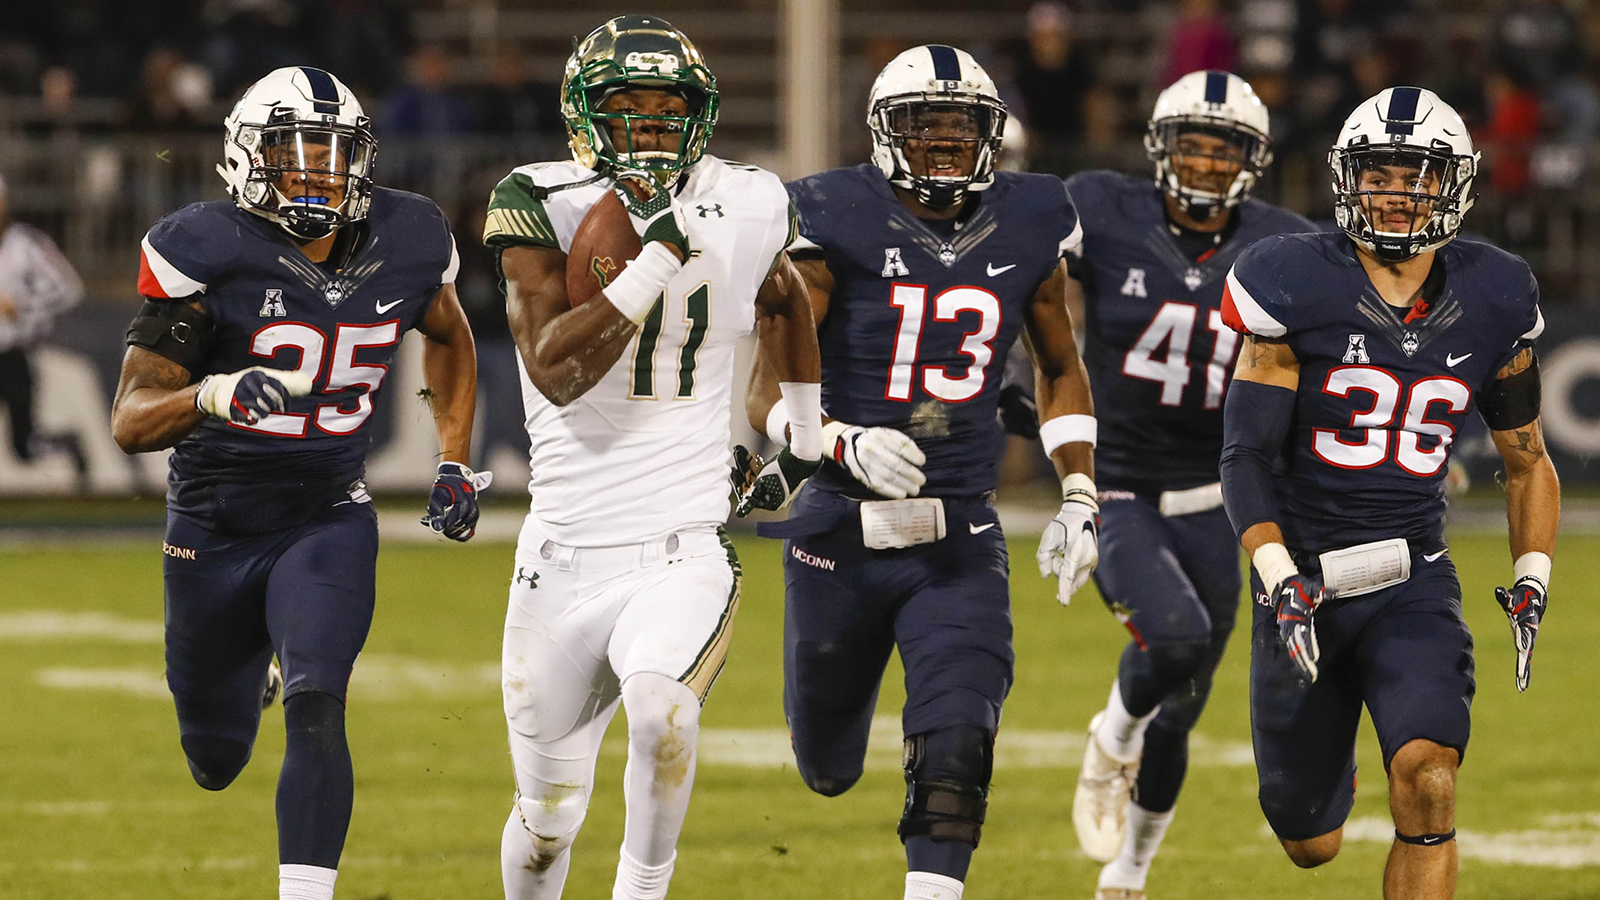 Quinton Flowers' career day lifts USF to road win over UConn